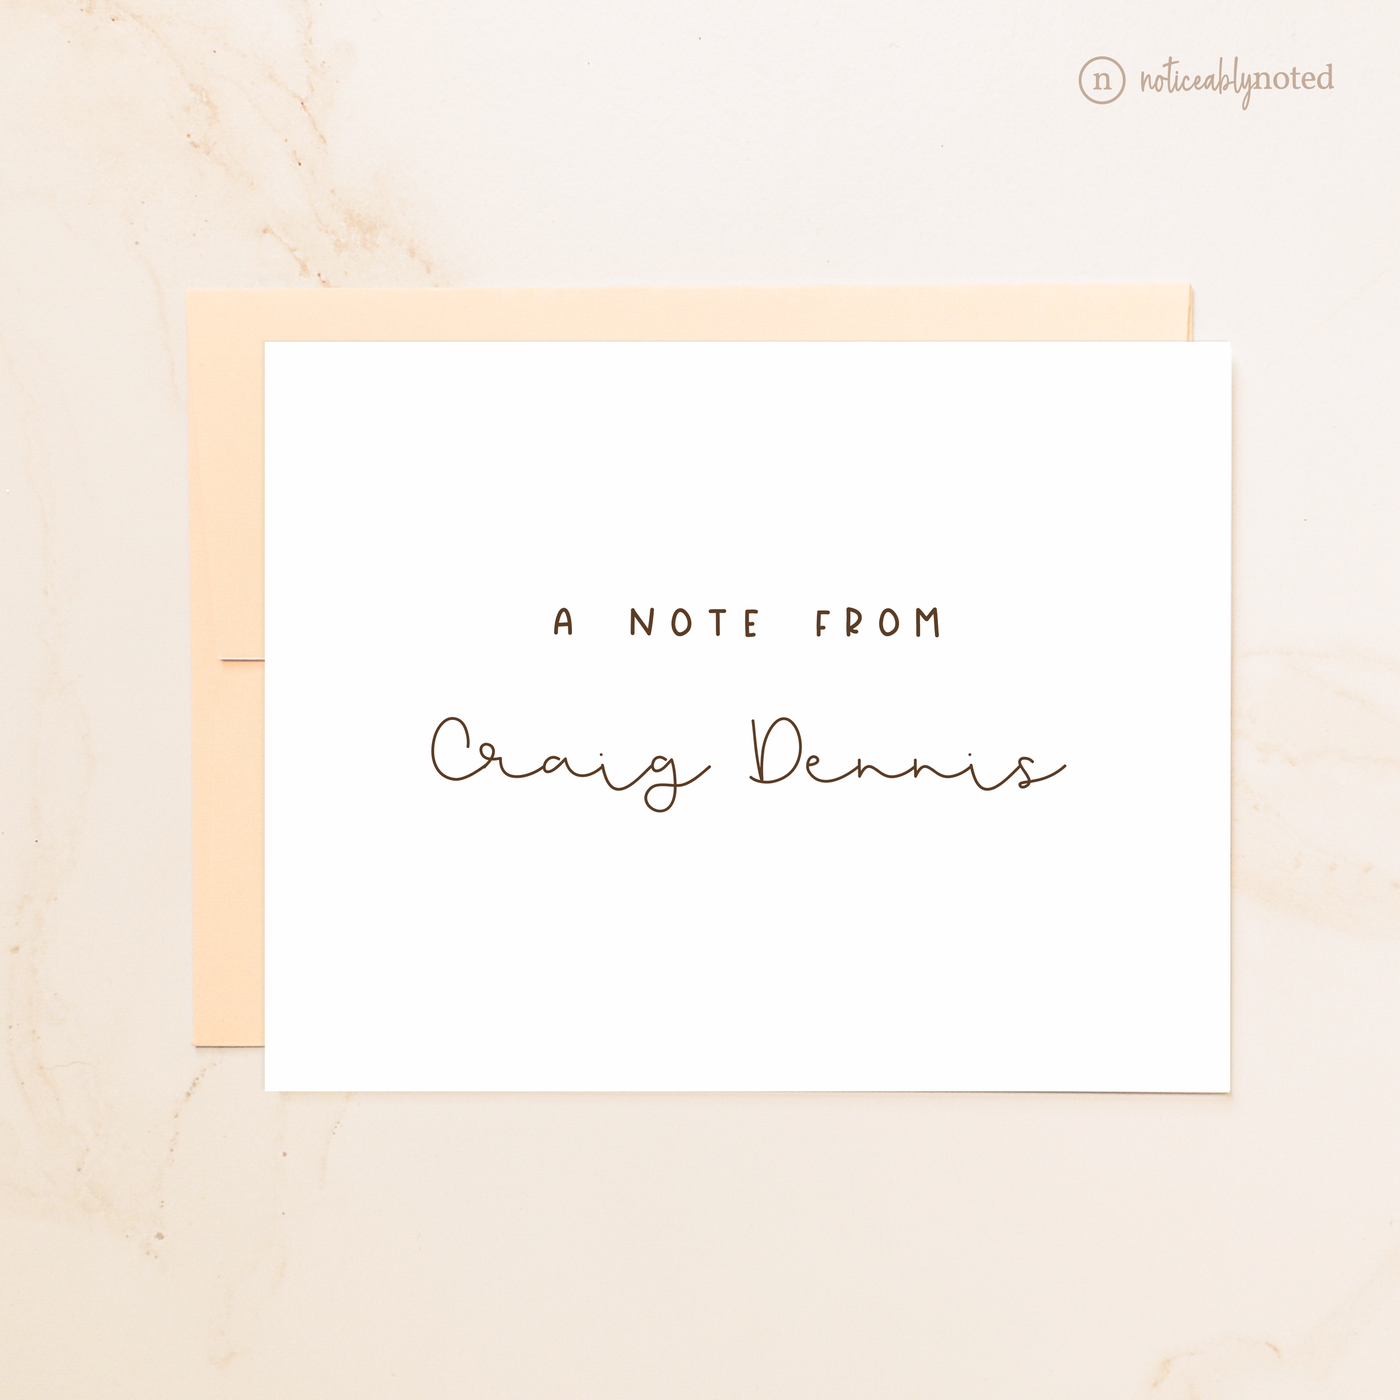 A Note From Personalized Note Cards | Noticeably Noted